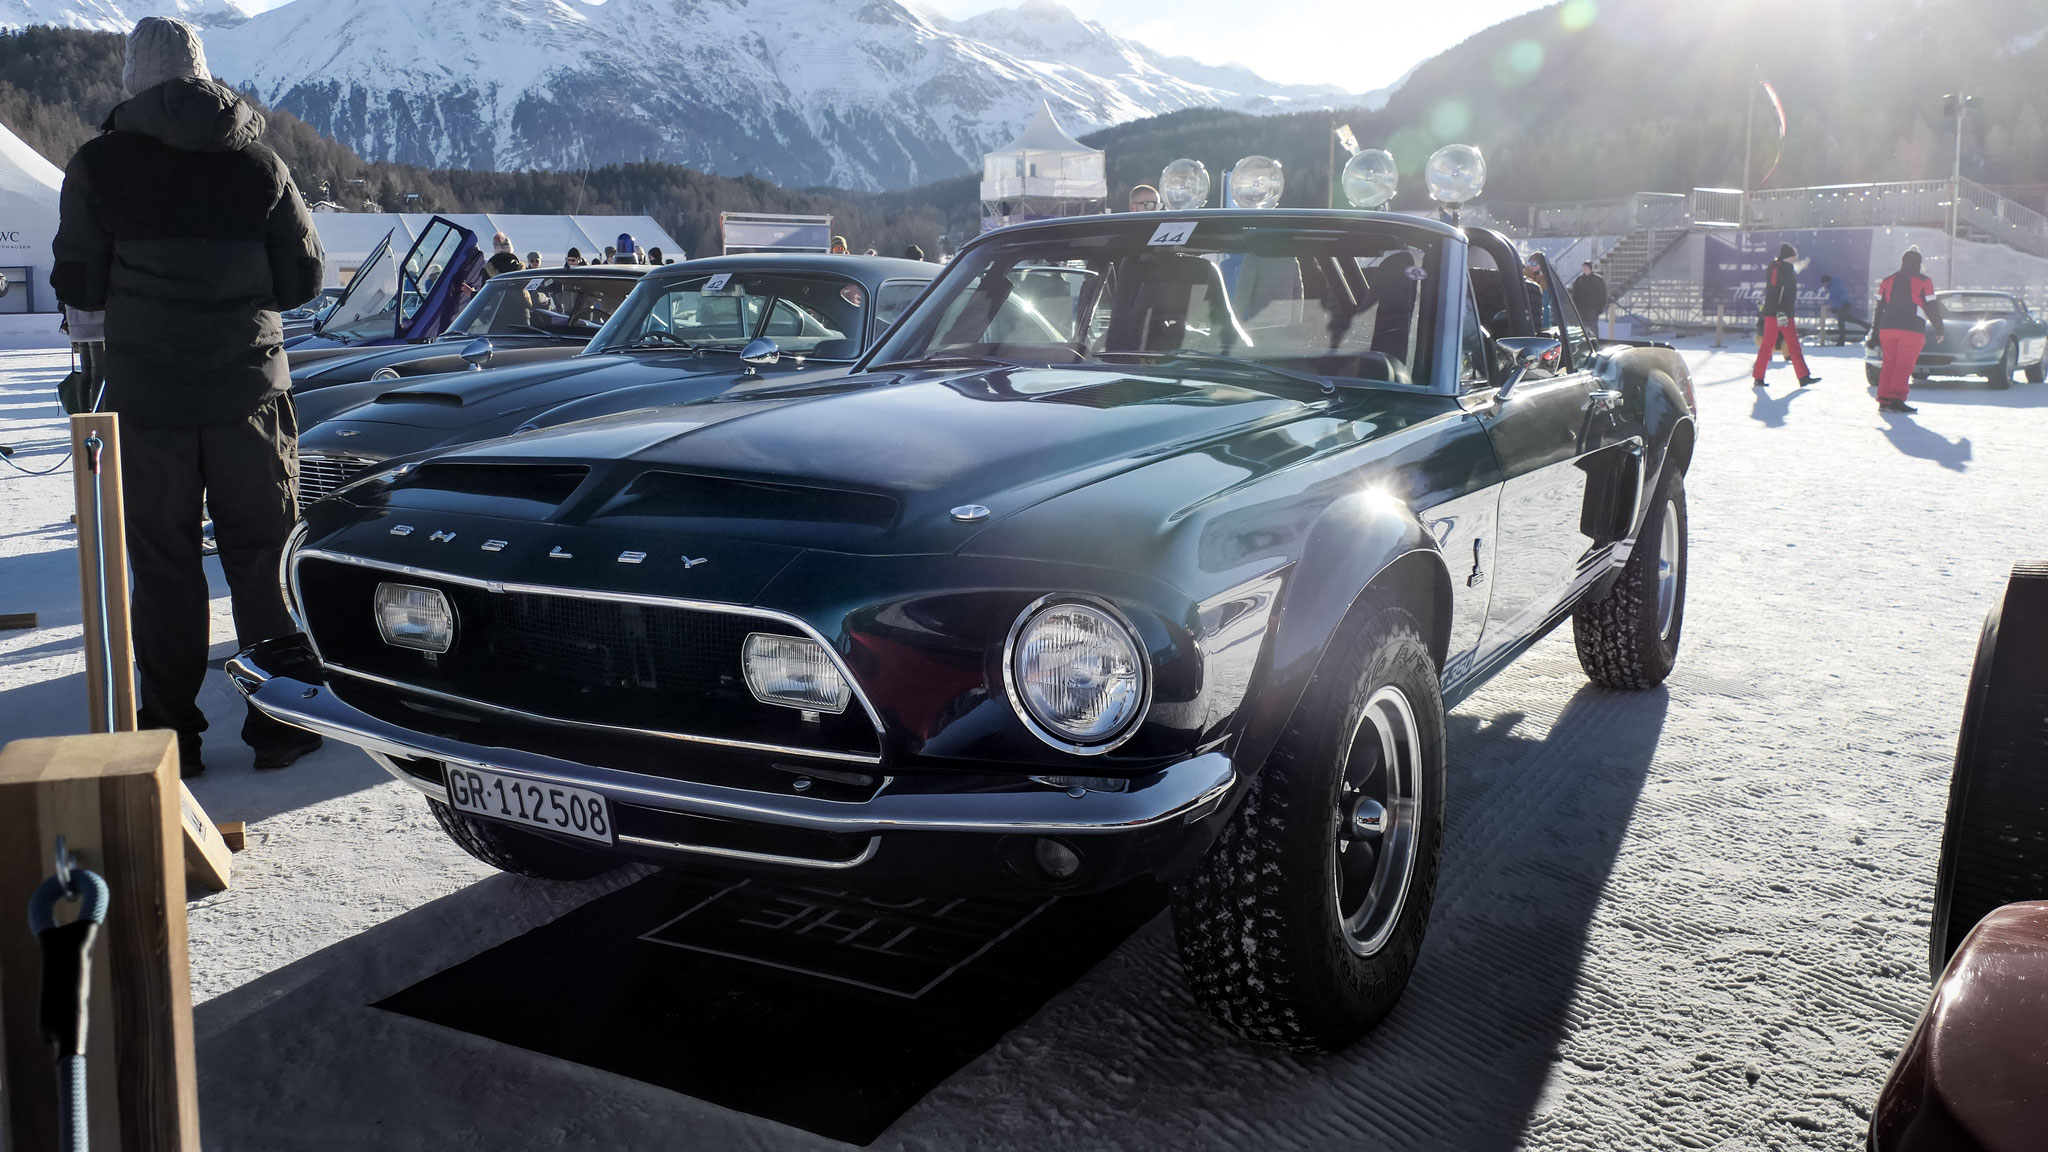 Mustang I Shelby Convertible - GR112508 (CH)